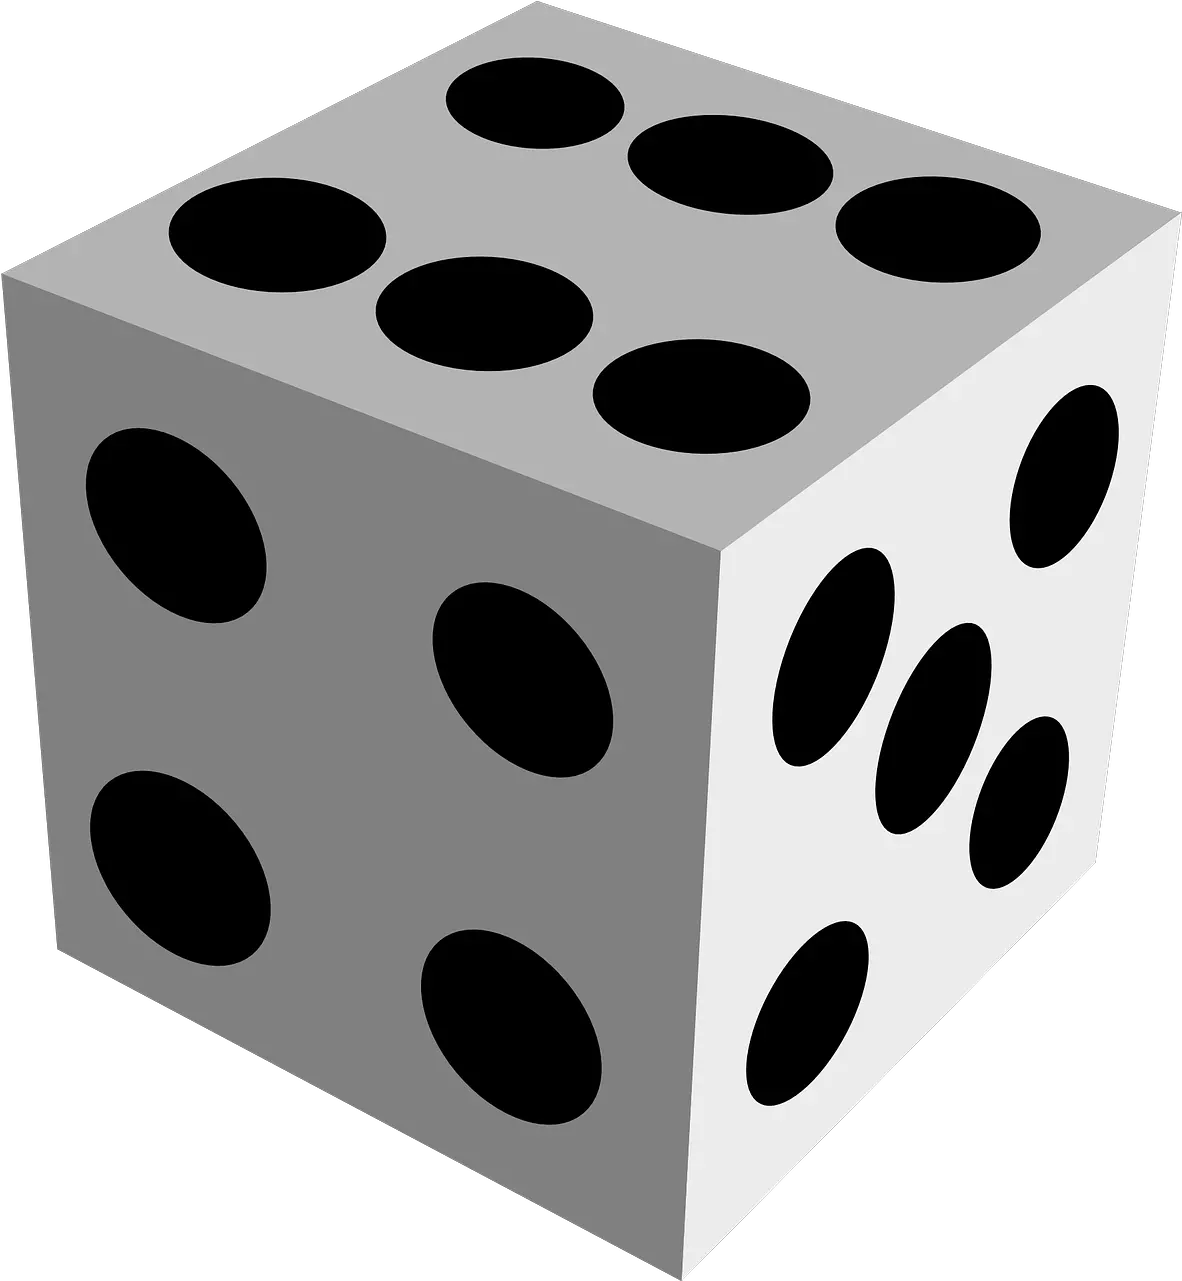 Dice Cube Gamble Game Of Luck Dice Png Dice Transparent Background